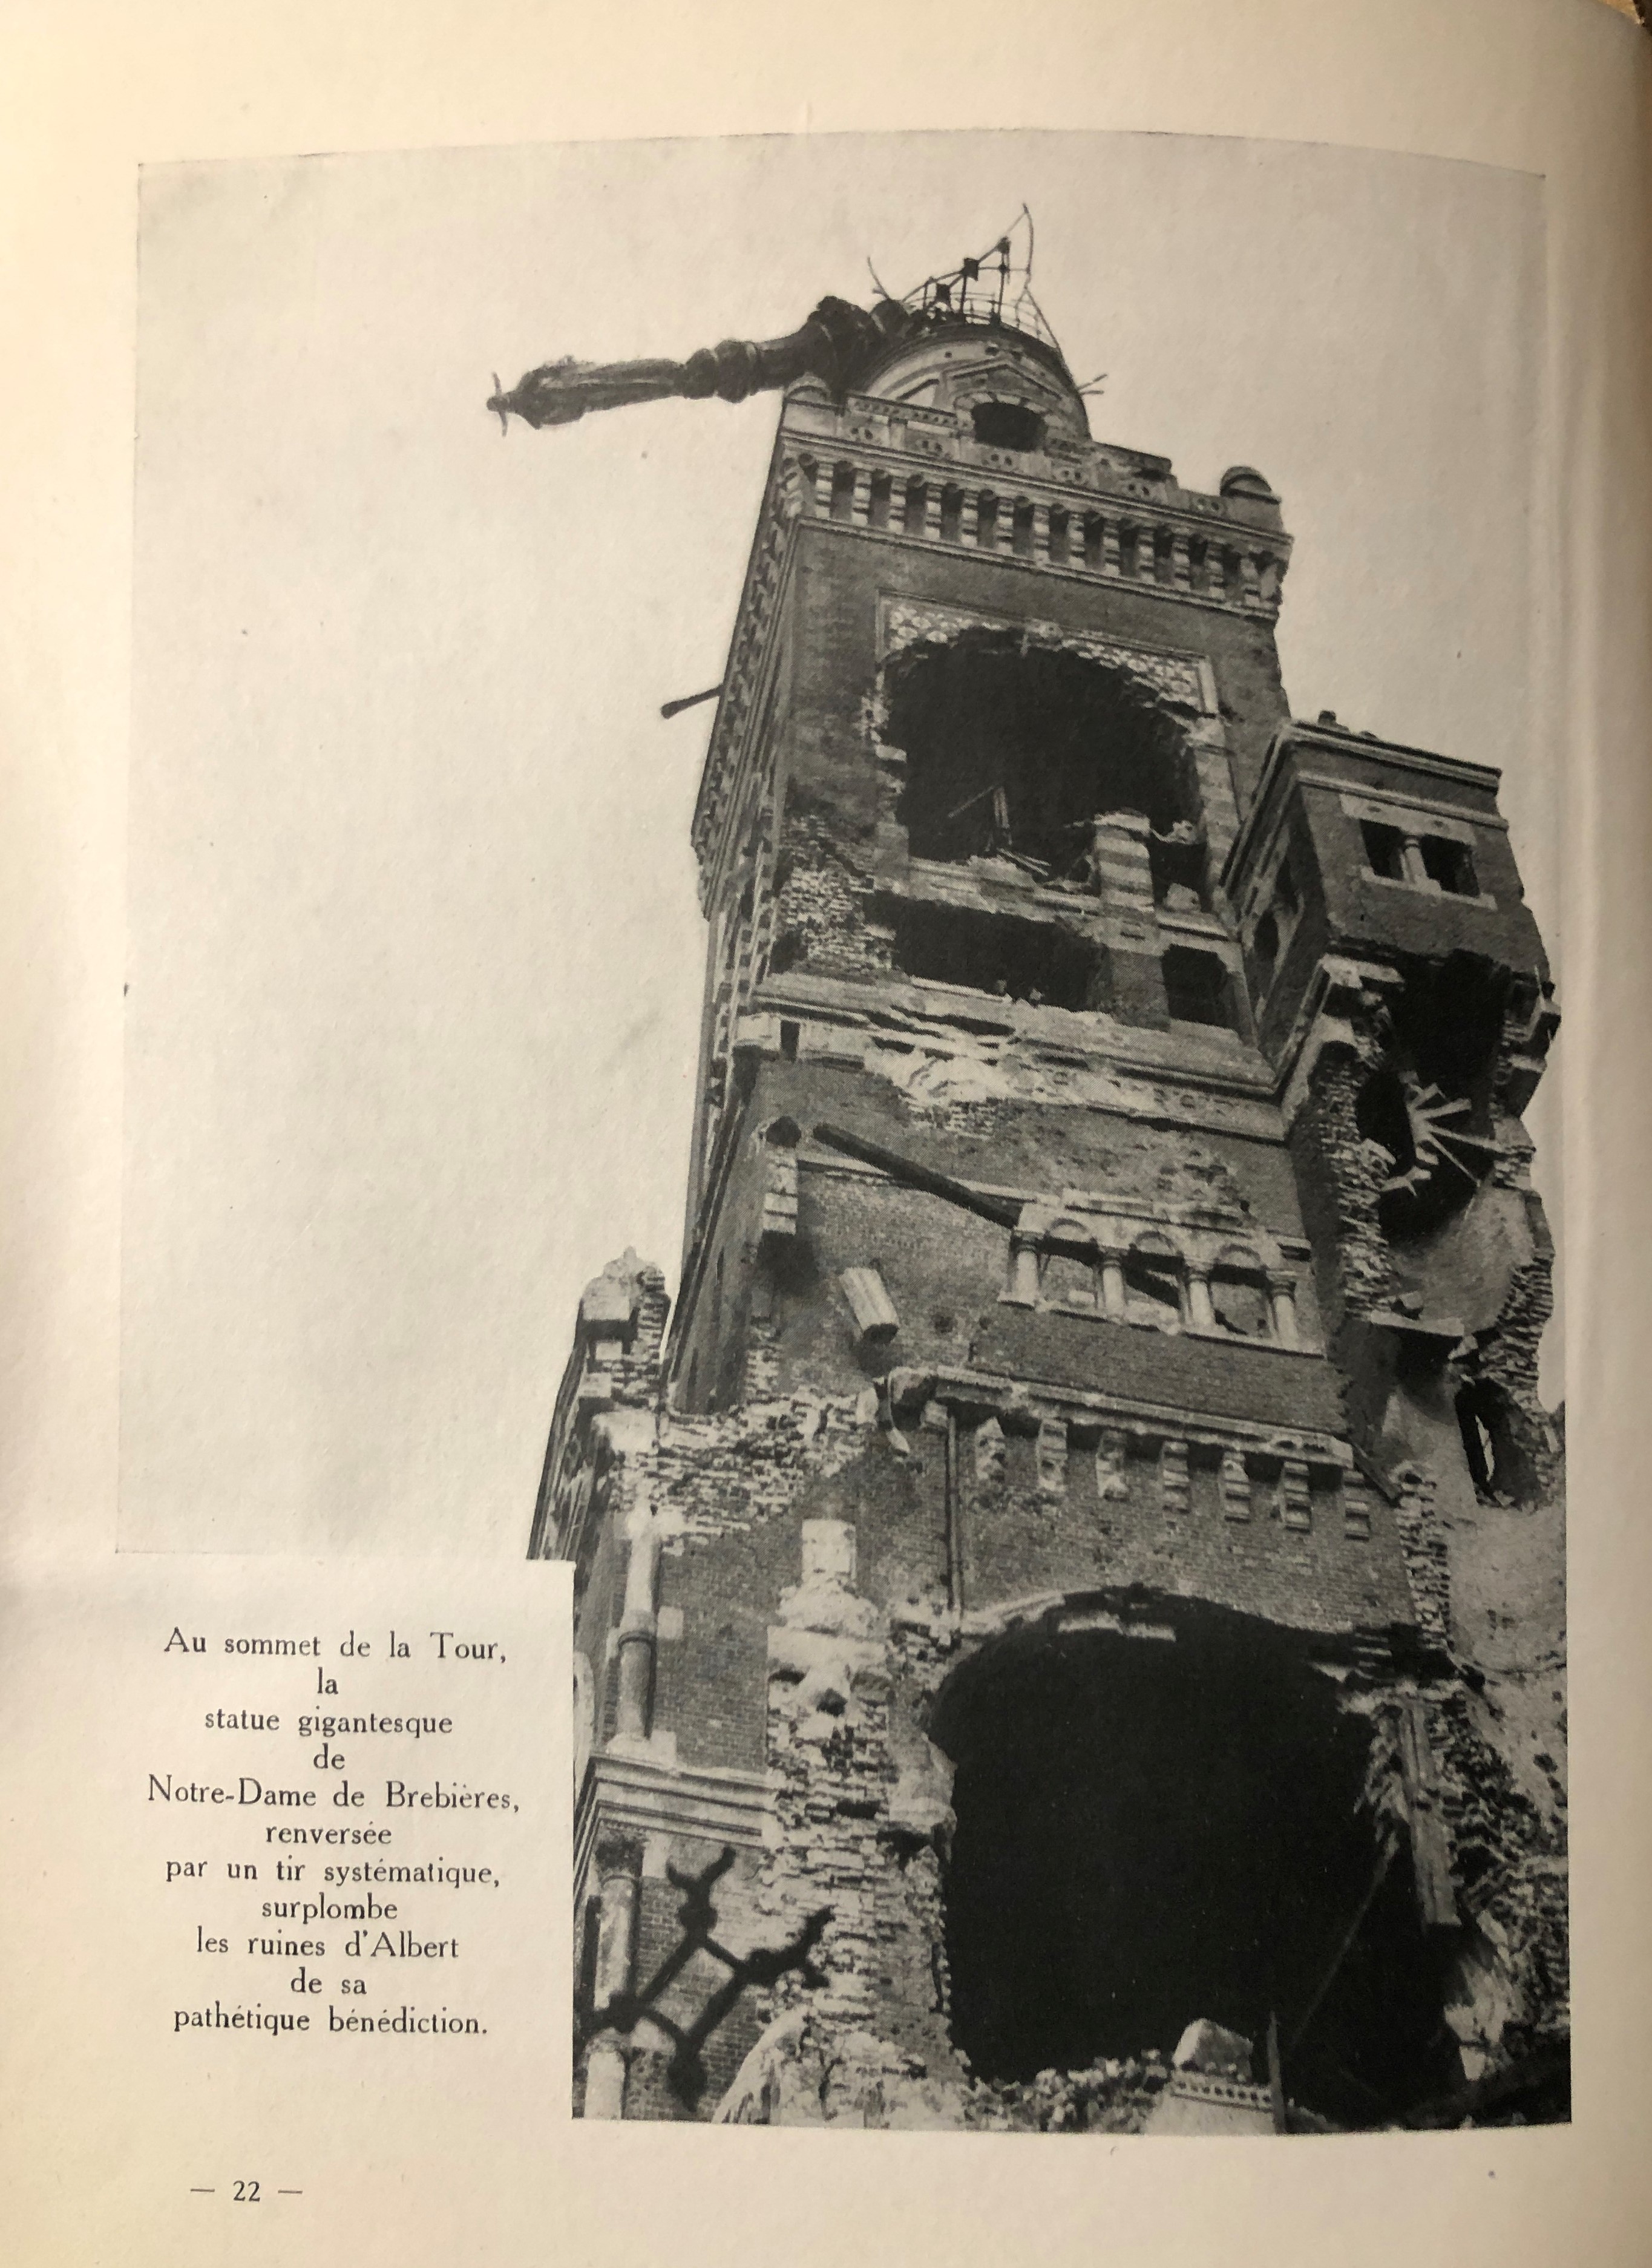 A photo of the destruction to the tower and statue basilica of Notre-Dame de Brebières, on the front lines of the Somme. The caption describes the Virgin and Child statue offering “pathétique bénédiction” to the surrounding ruins.